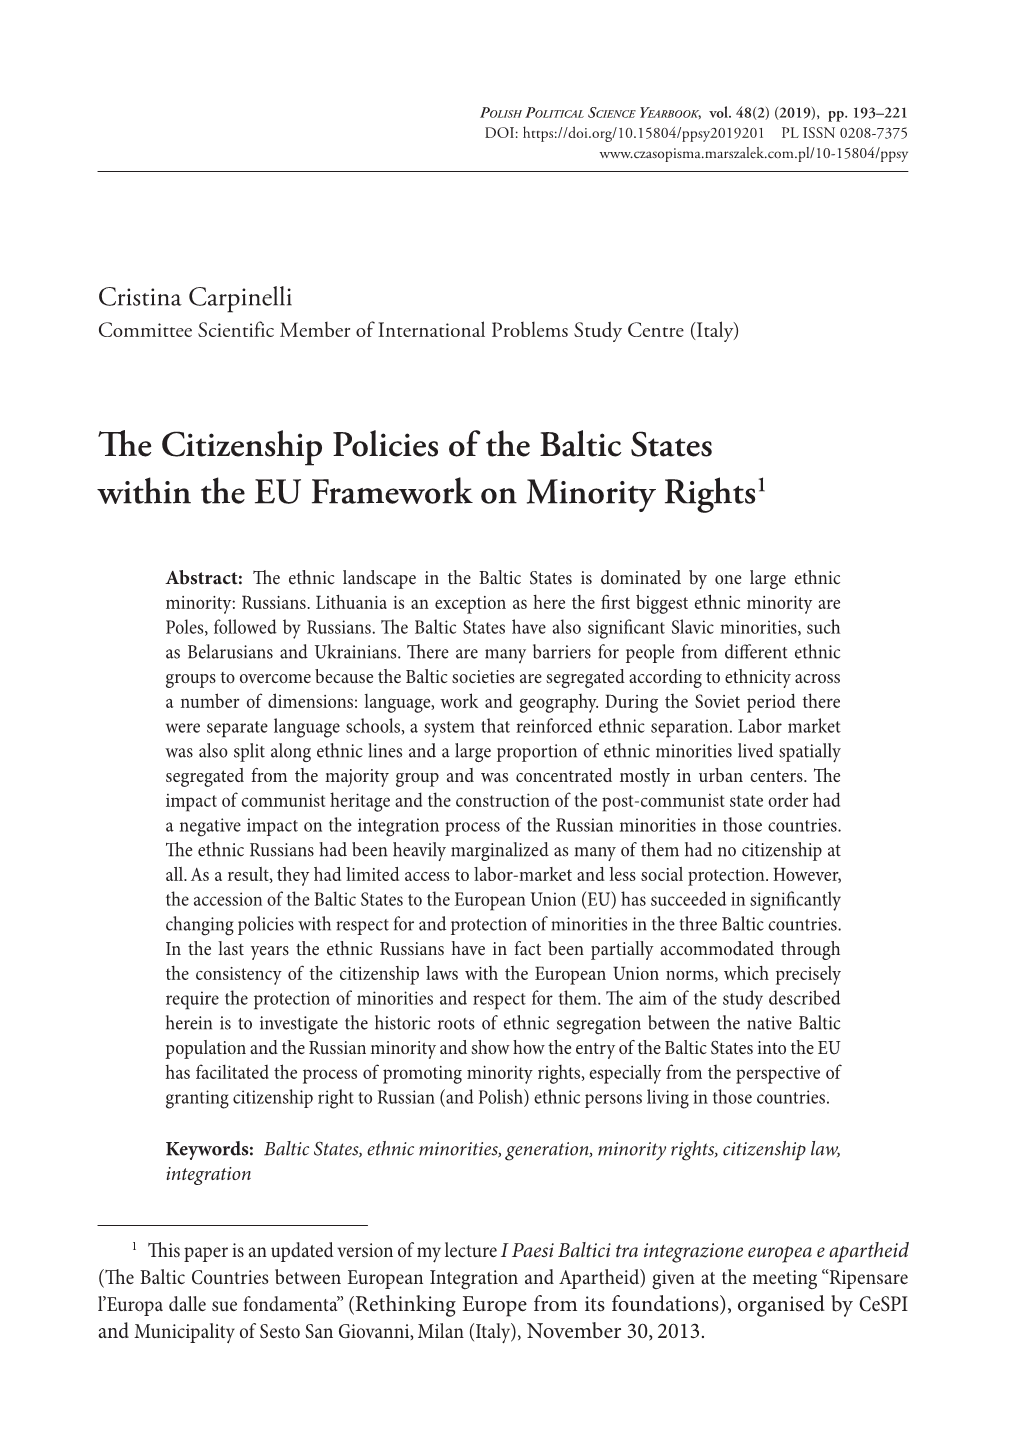 The Citizenship Policies of the Baltic States Within the EU Framework on Minority Rights1